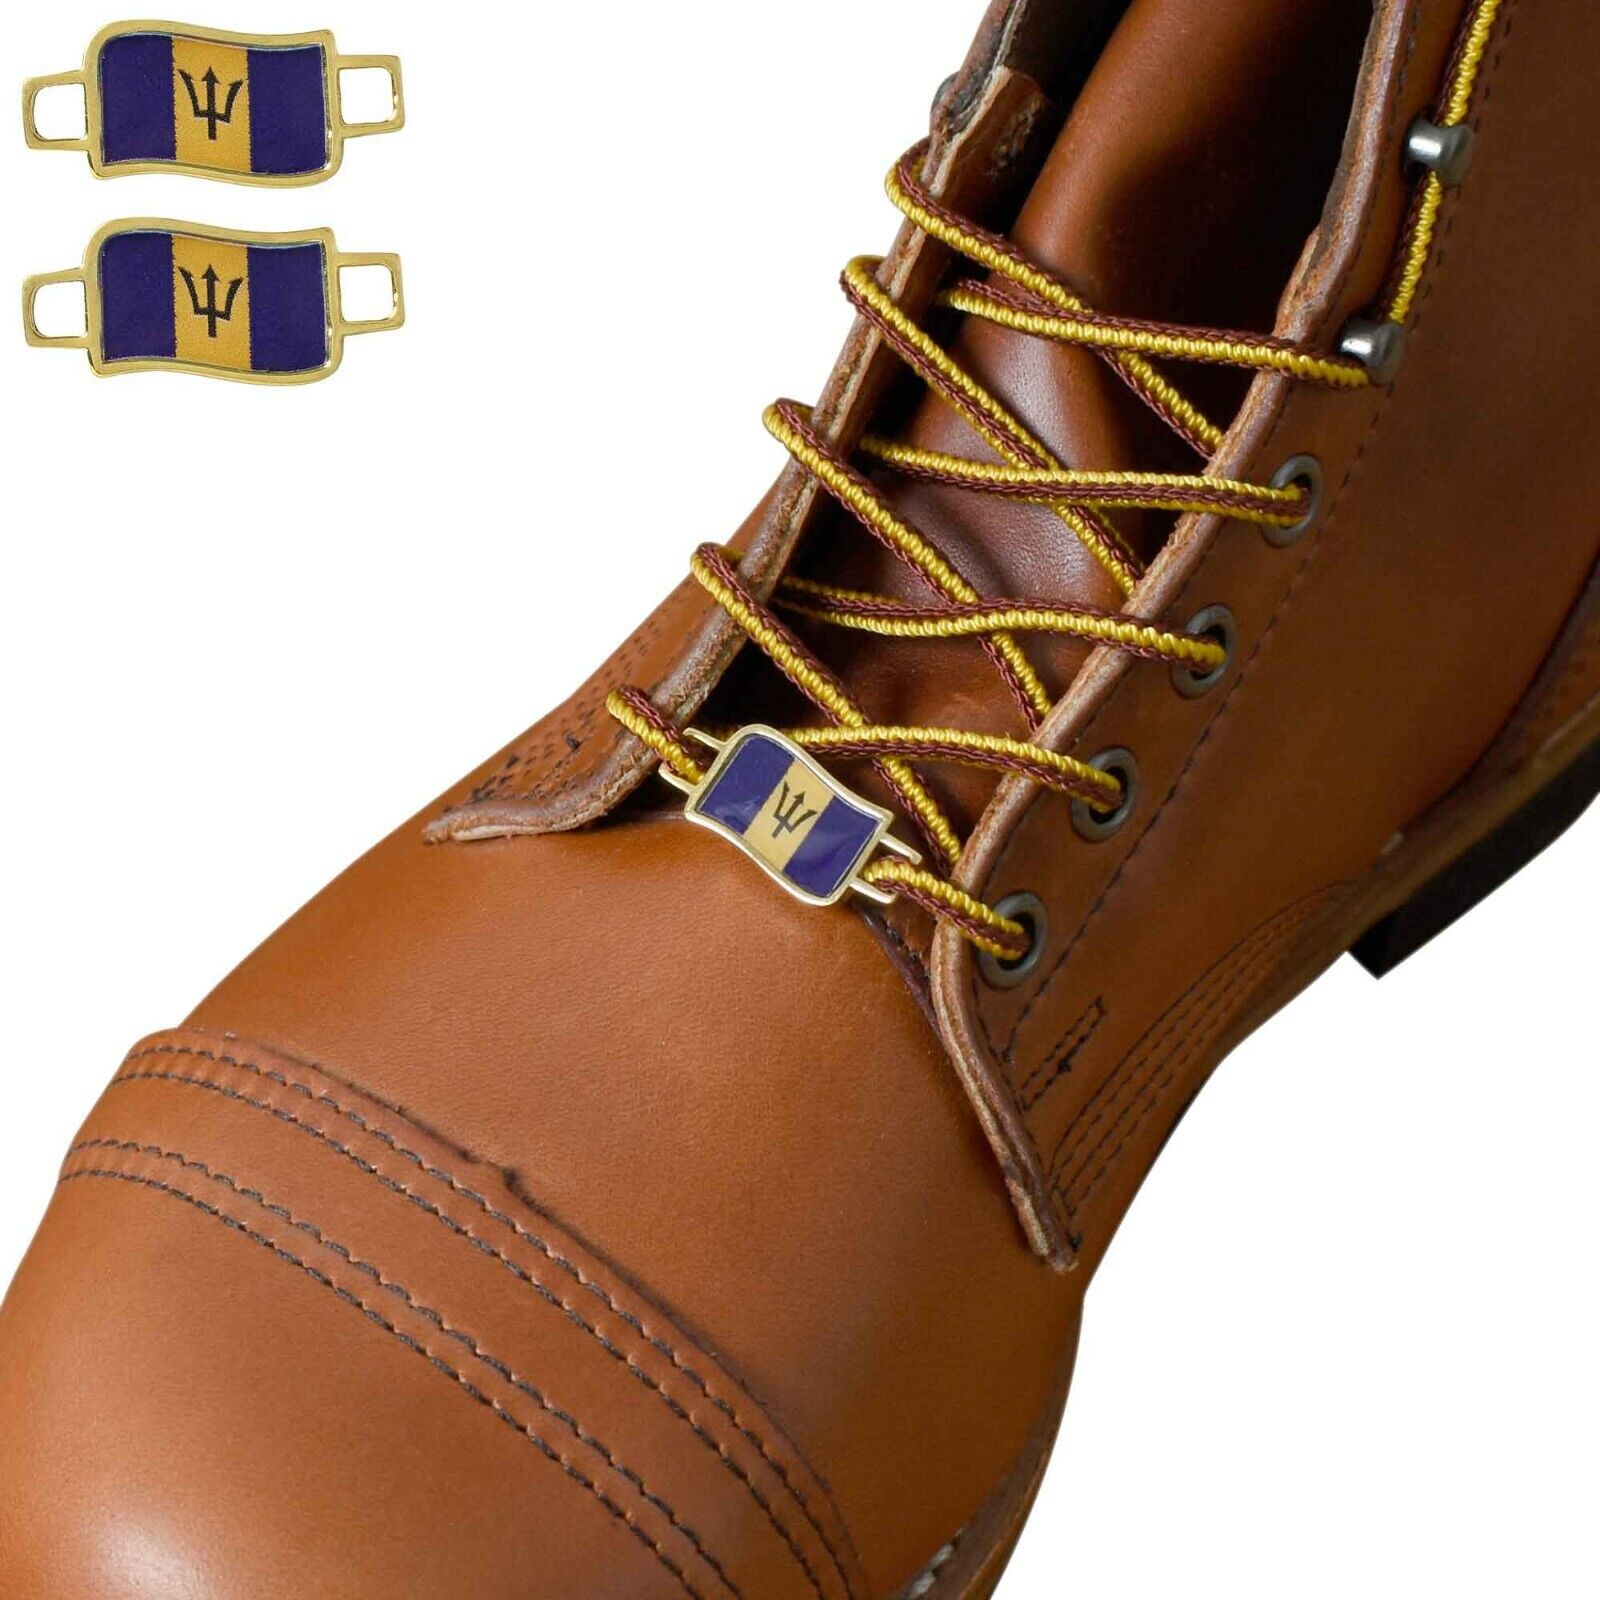 Barbados Flags Shoes Boot Shoelace Keeper Holder Charm BrooklynMaker